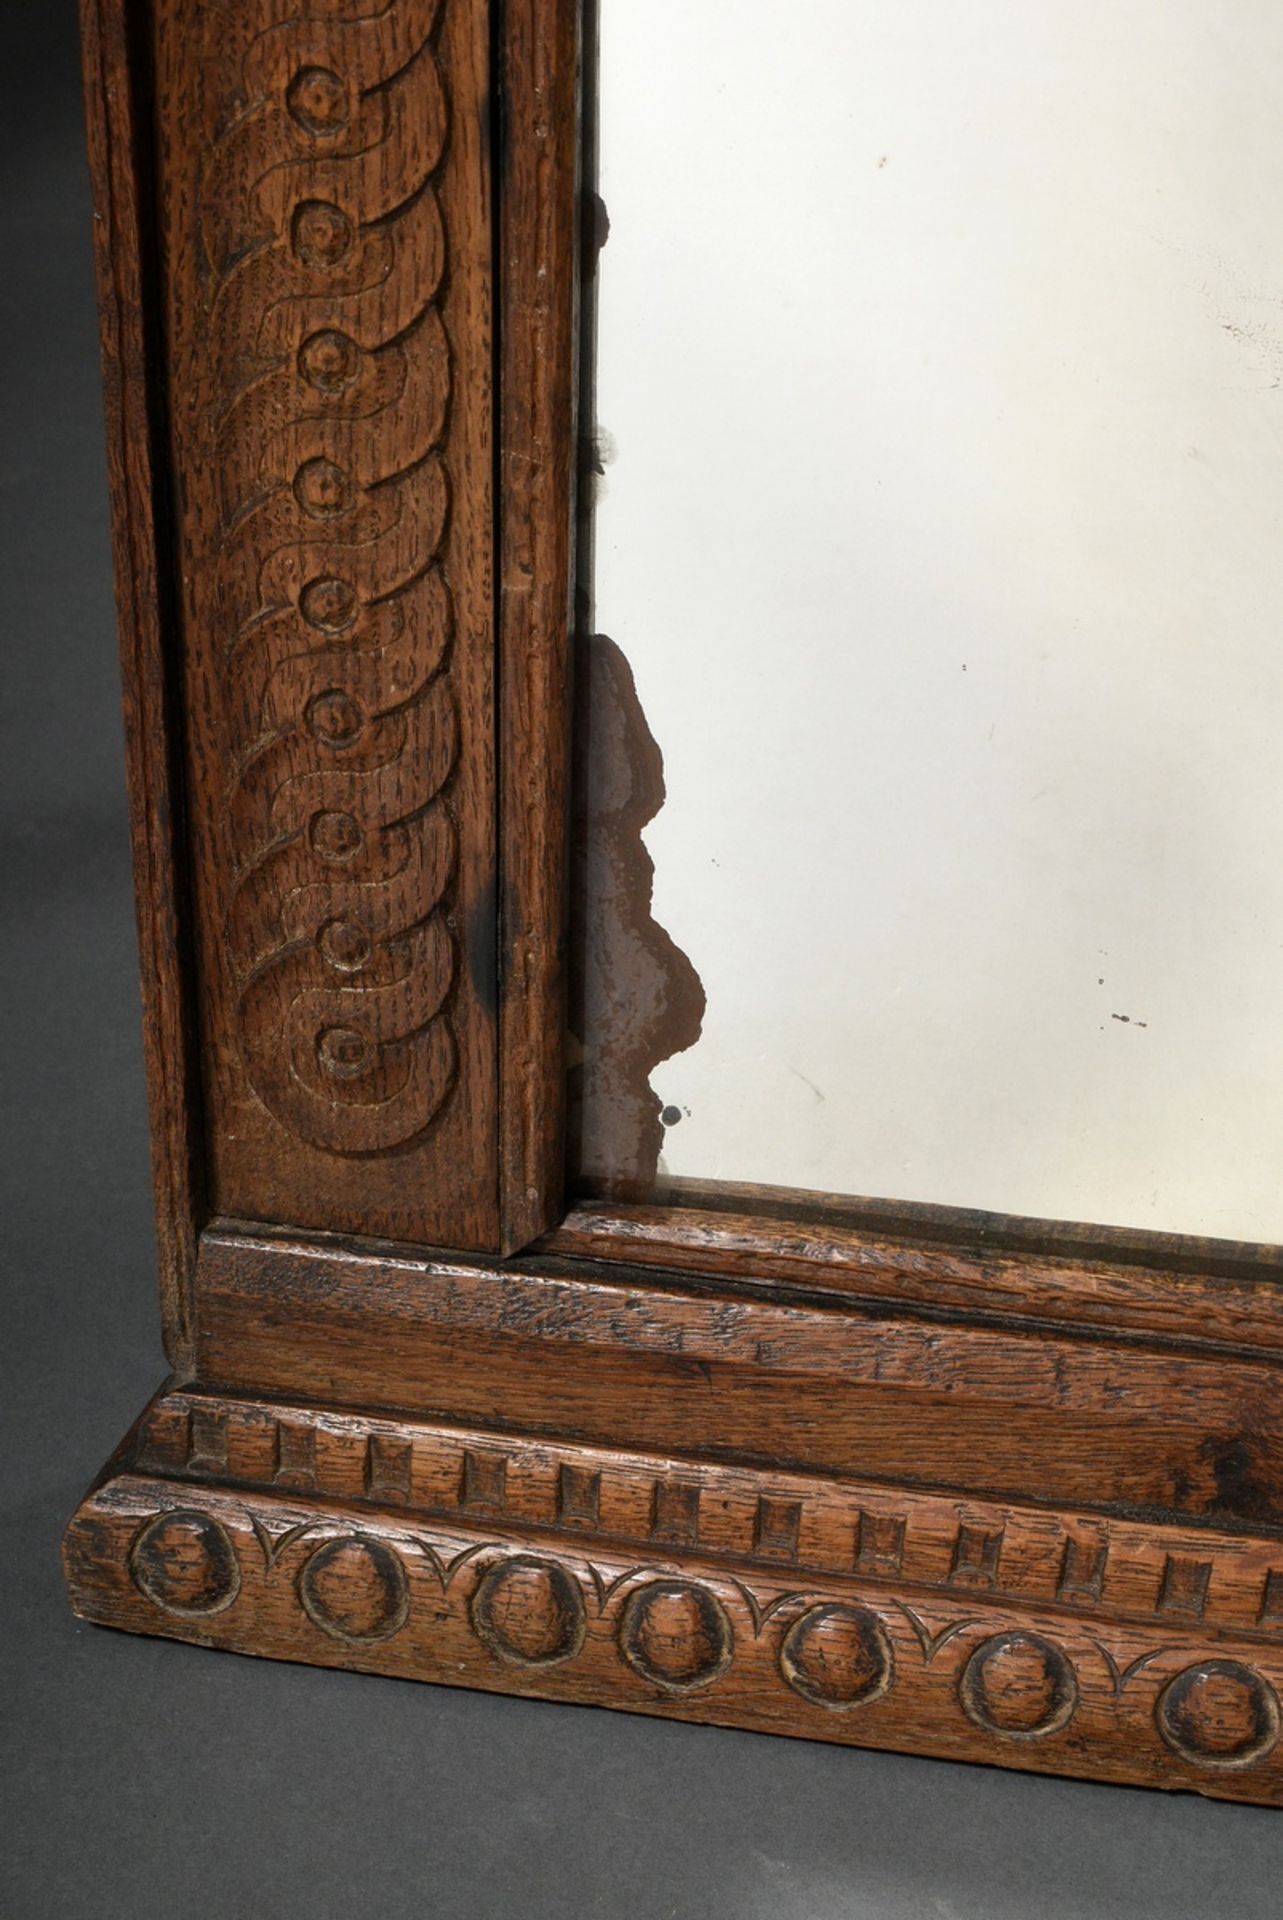 Rustic console mirror in ornamental and vegetal carved oak frame, old mirror glass, 88x53cm, small  - Image 2 of 4